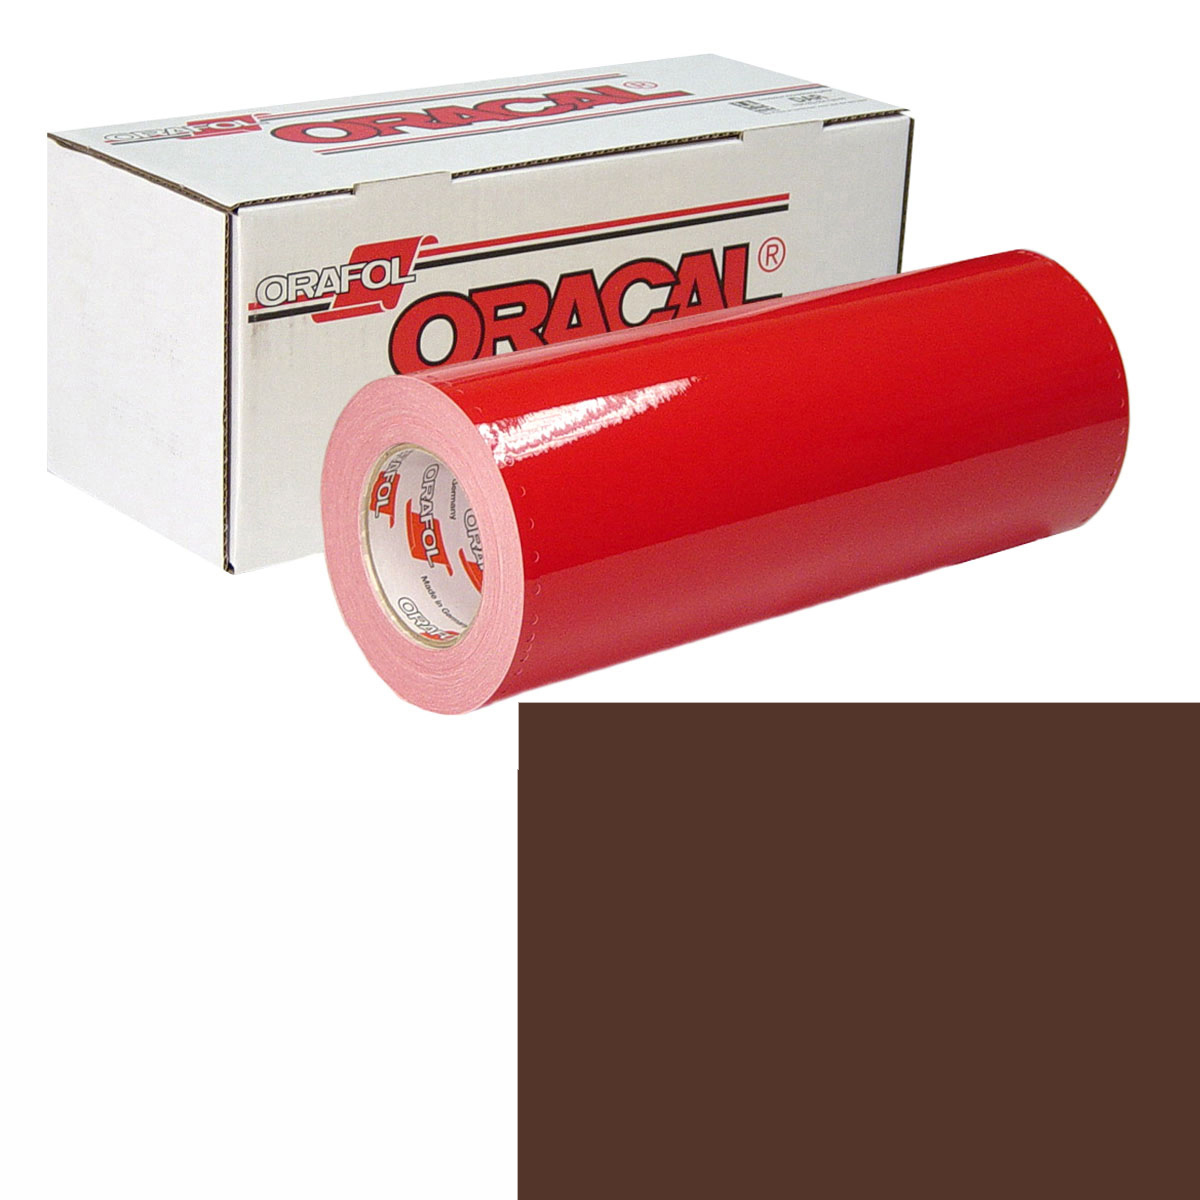 ORACAL 951 15in X 10yd 810 Cocoa Brown